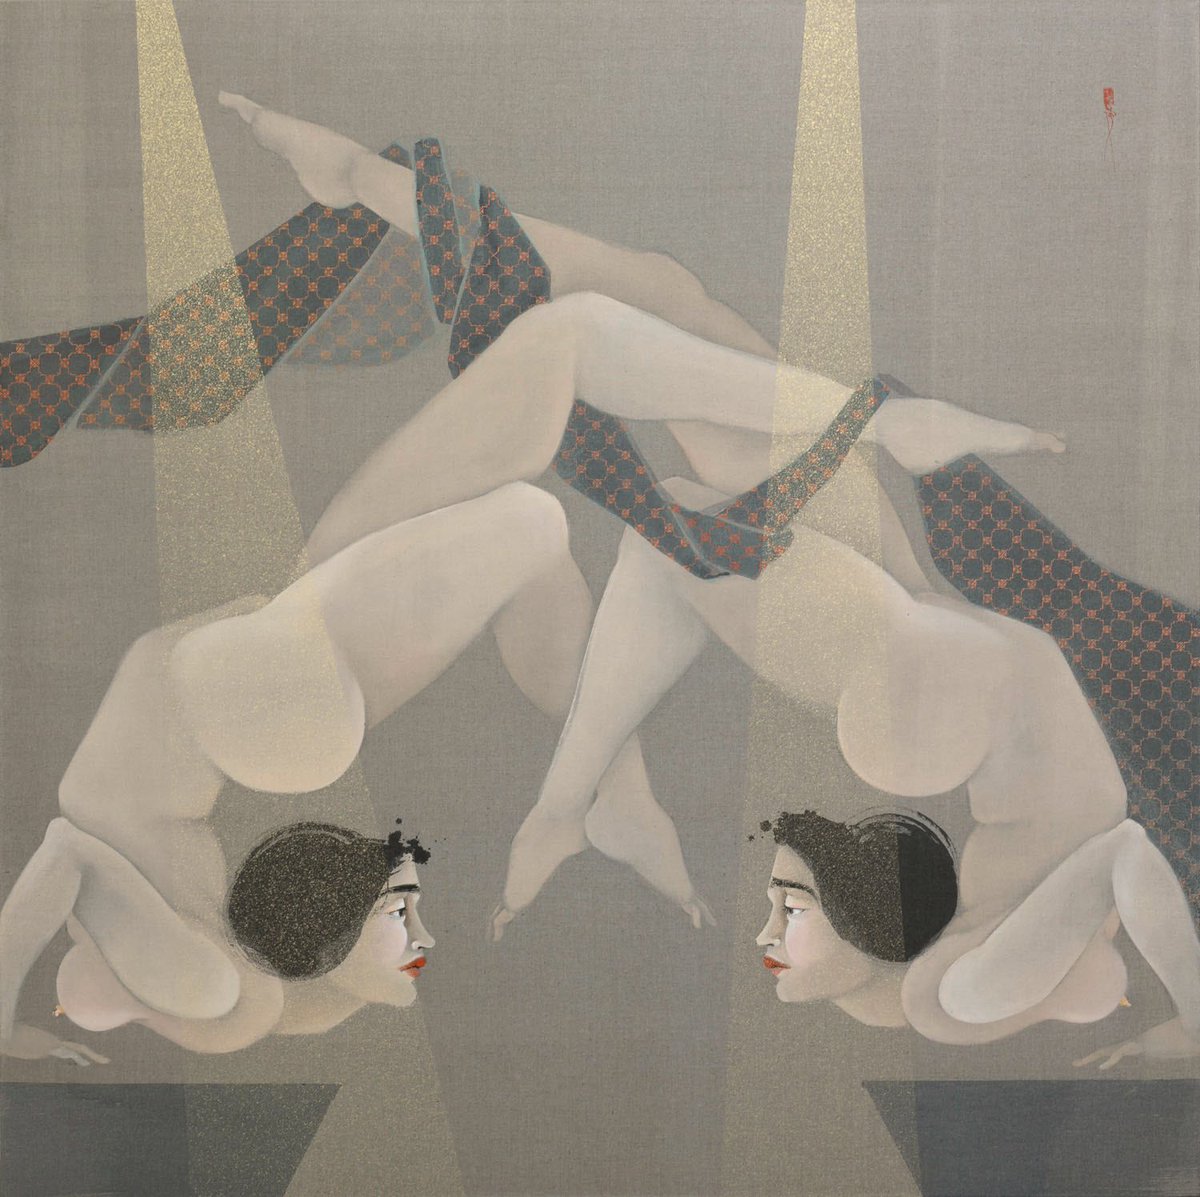 Hayv Kahraman consistently blows me away. Her last show at  @JackShainman got me a little choked up. She’s on Instagram here:  https://instagram.com/hayvkahraman 